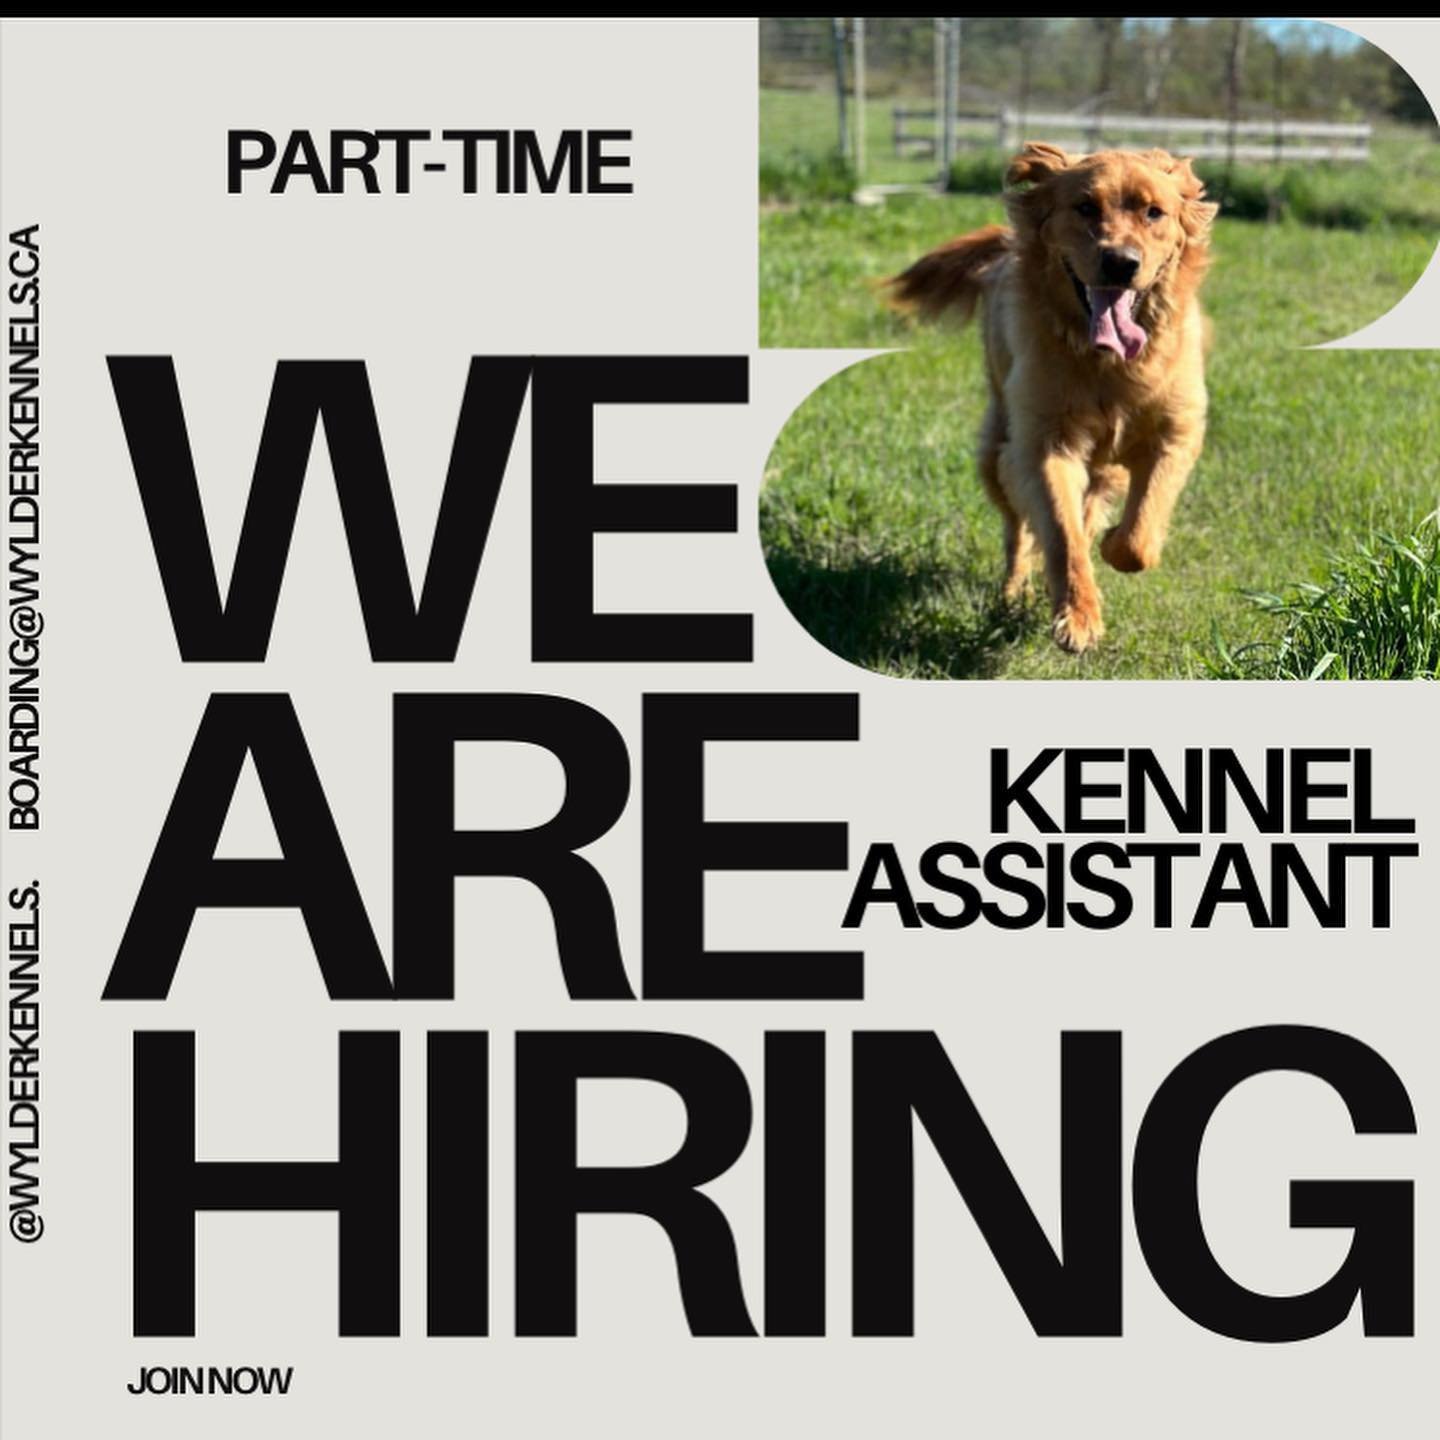 Exciting announcements! 🐾 ✨ 

We are hiring! Summer is just around the corner and we are looking for new team members. If you love dogs and being active outdoors, please send a resume and cover letter to us at boarding@wylderkennels.ca. We look forw